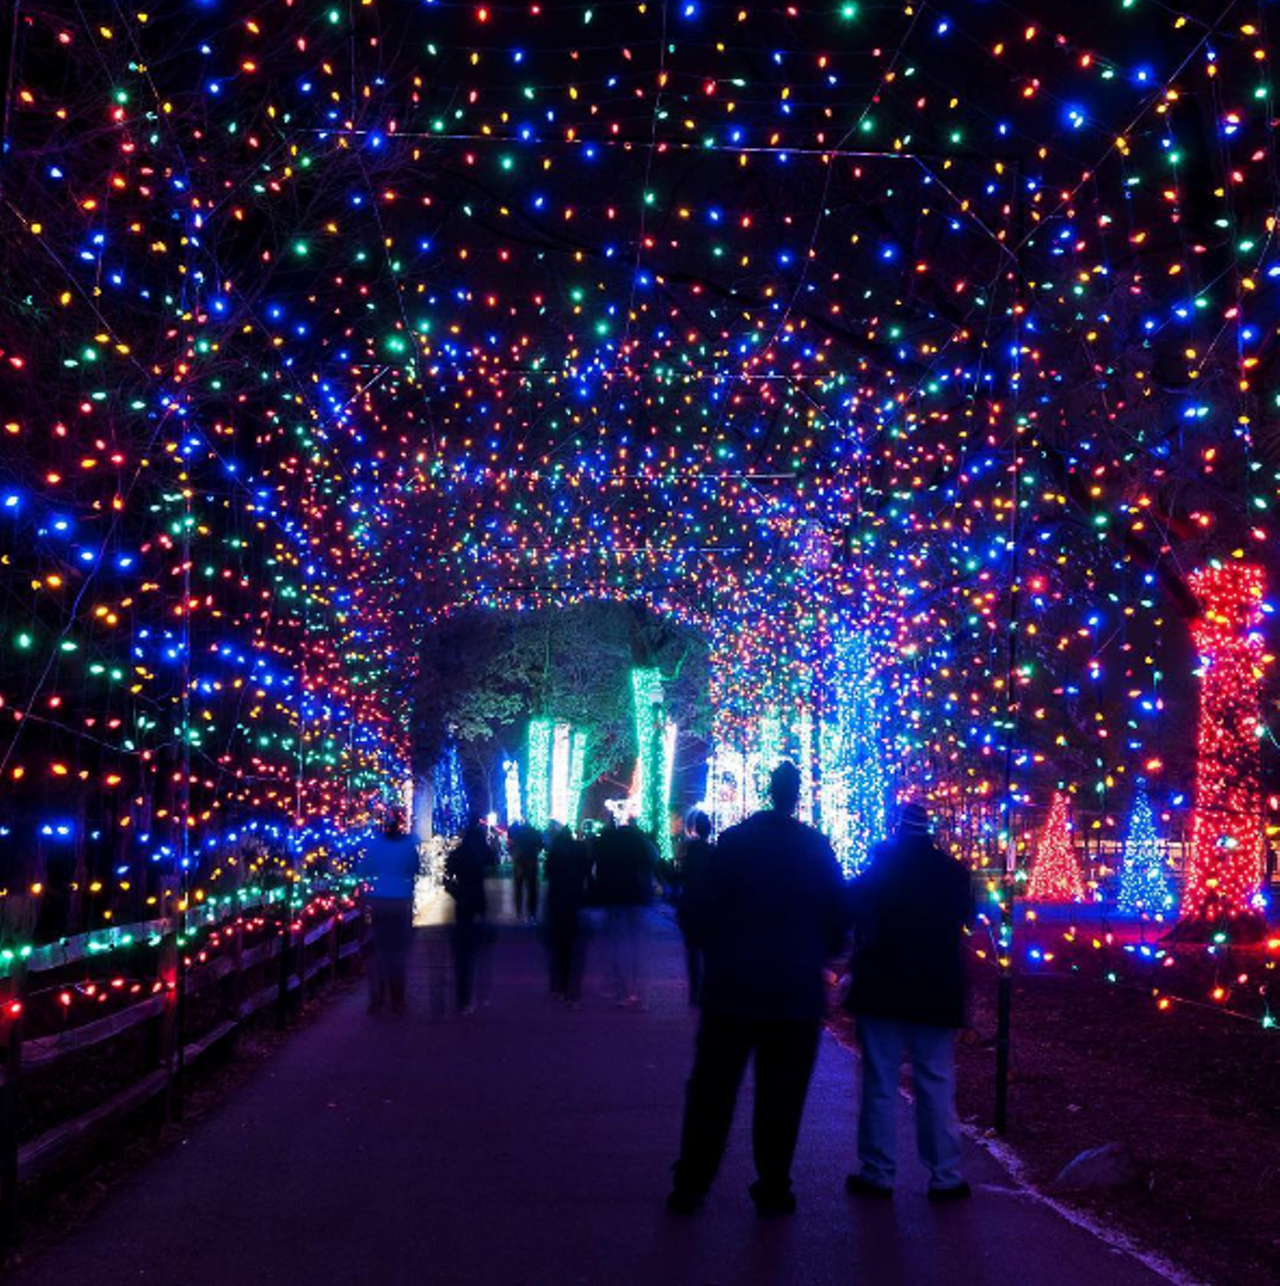 Wednesday, 12/7
Polar Beers
@ The Detroit Zoo
Holiday lights are already great, but they&#146;re even better with Michigan craft beer. Leave the kids at home for this trip to the zoo, where you&#146;re invited to take in over five million LED lights as you imbibe the state&#146;s finest winter brews. You&#146;ll get  12 beer tasting tickets with your admission, but you are able to buy  more. You&#146;ll get to walk the half-mile trail and enjoy some pretty nifty animal ice sculptures while the real animals stay toasty!
Event starts at 6 p.m.; 8450 W. 10 Mile Rd., Royal Oak; detroitzoo.org; Tickets are $40-$60.